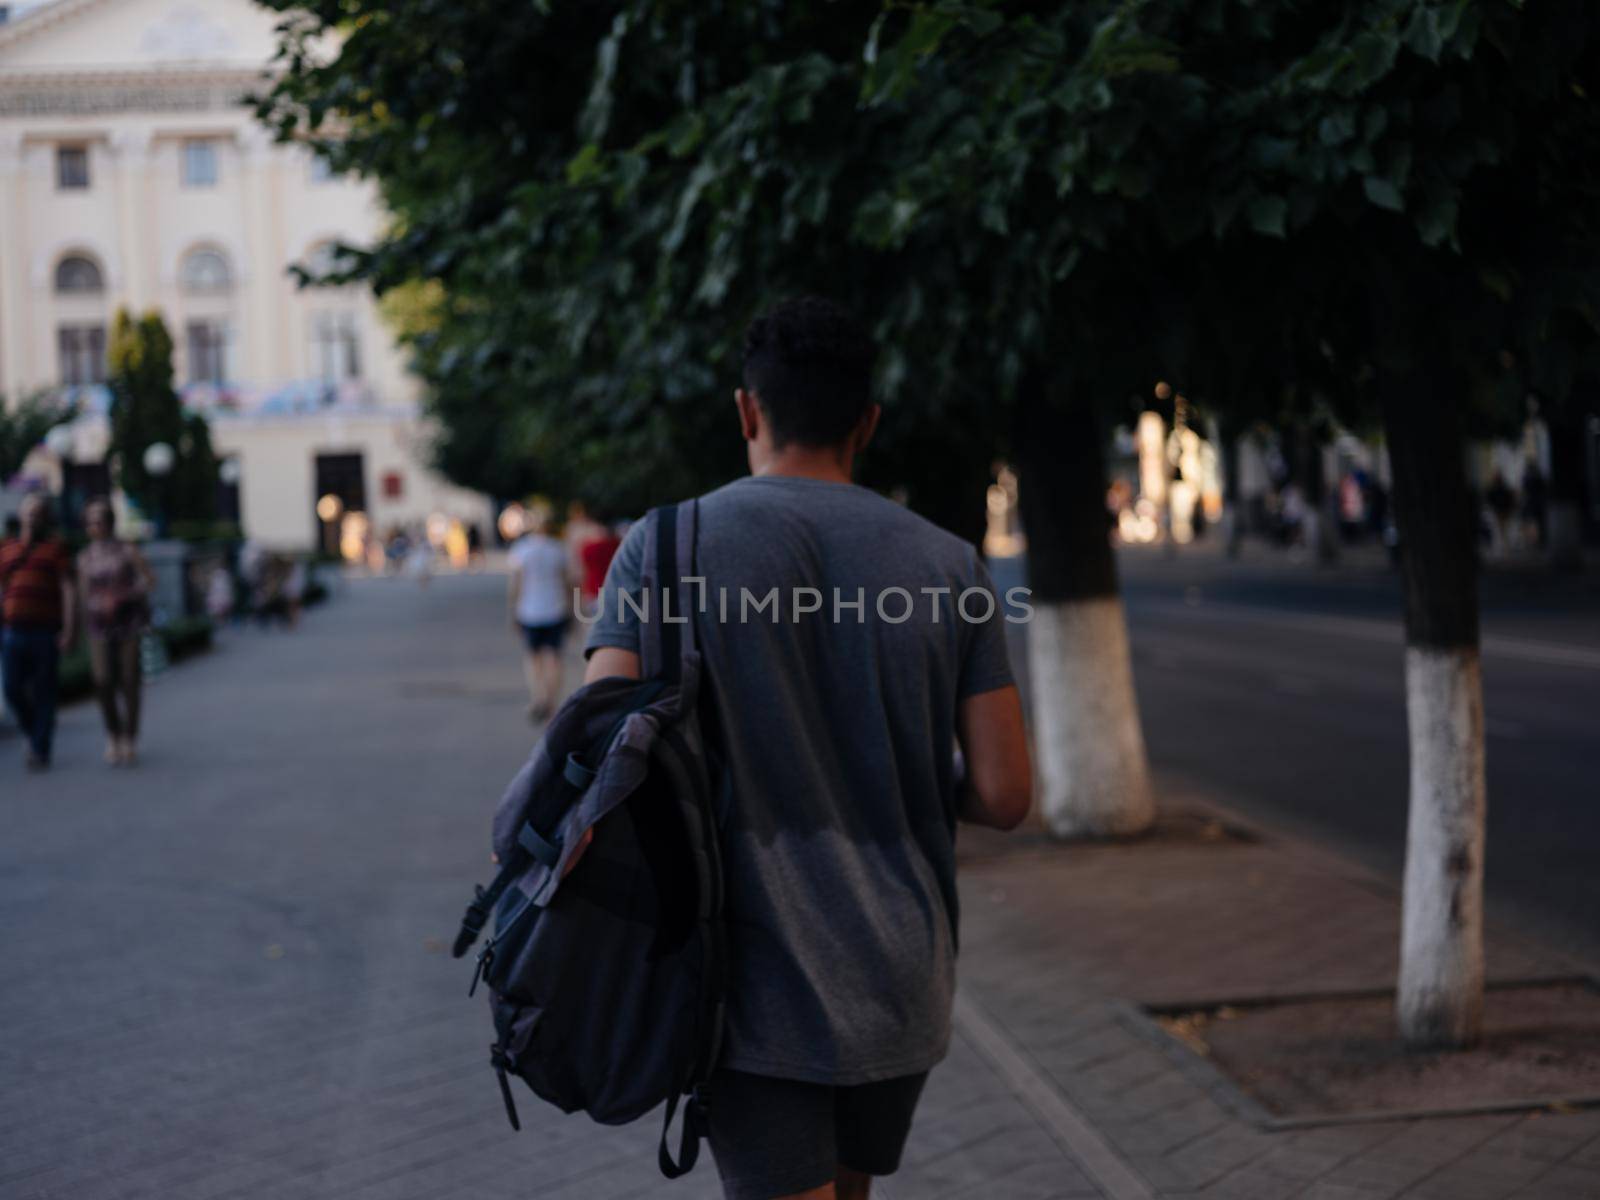 A man walks down the street in nature near buildings in the city by SHOTPRIME